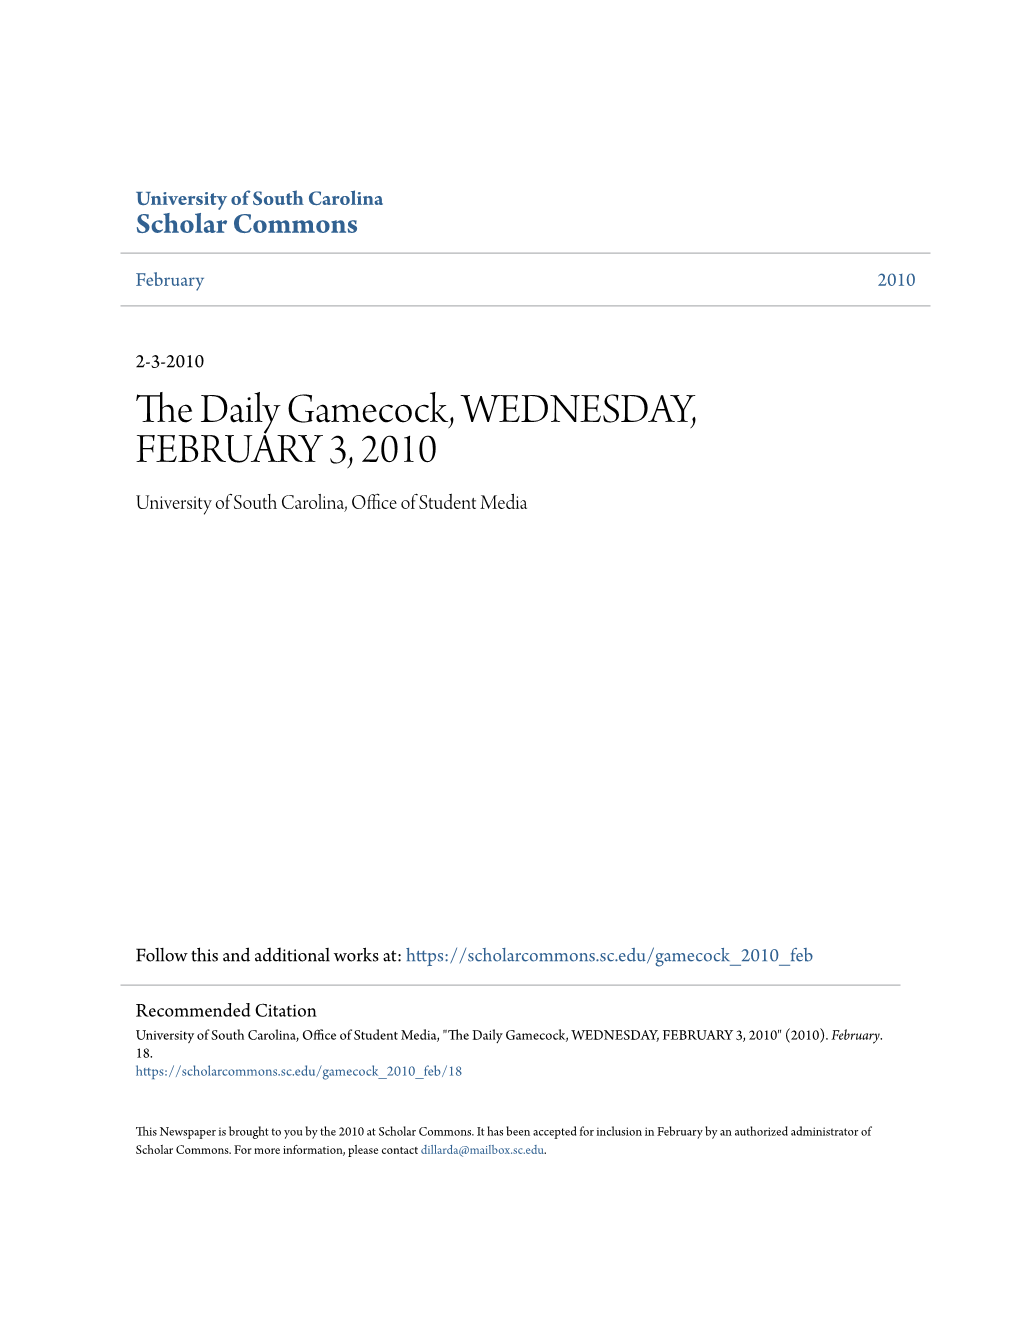 The Daily Gamecock, WEDNESDAY, FEBRUARY 3, 2010